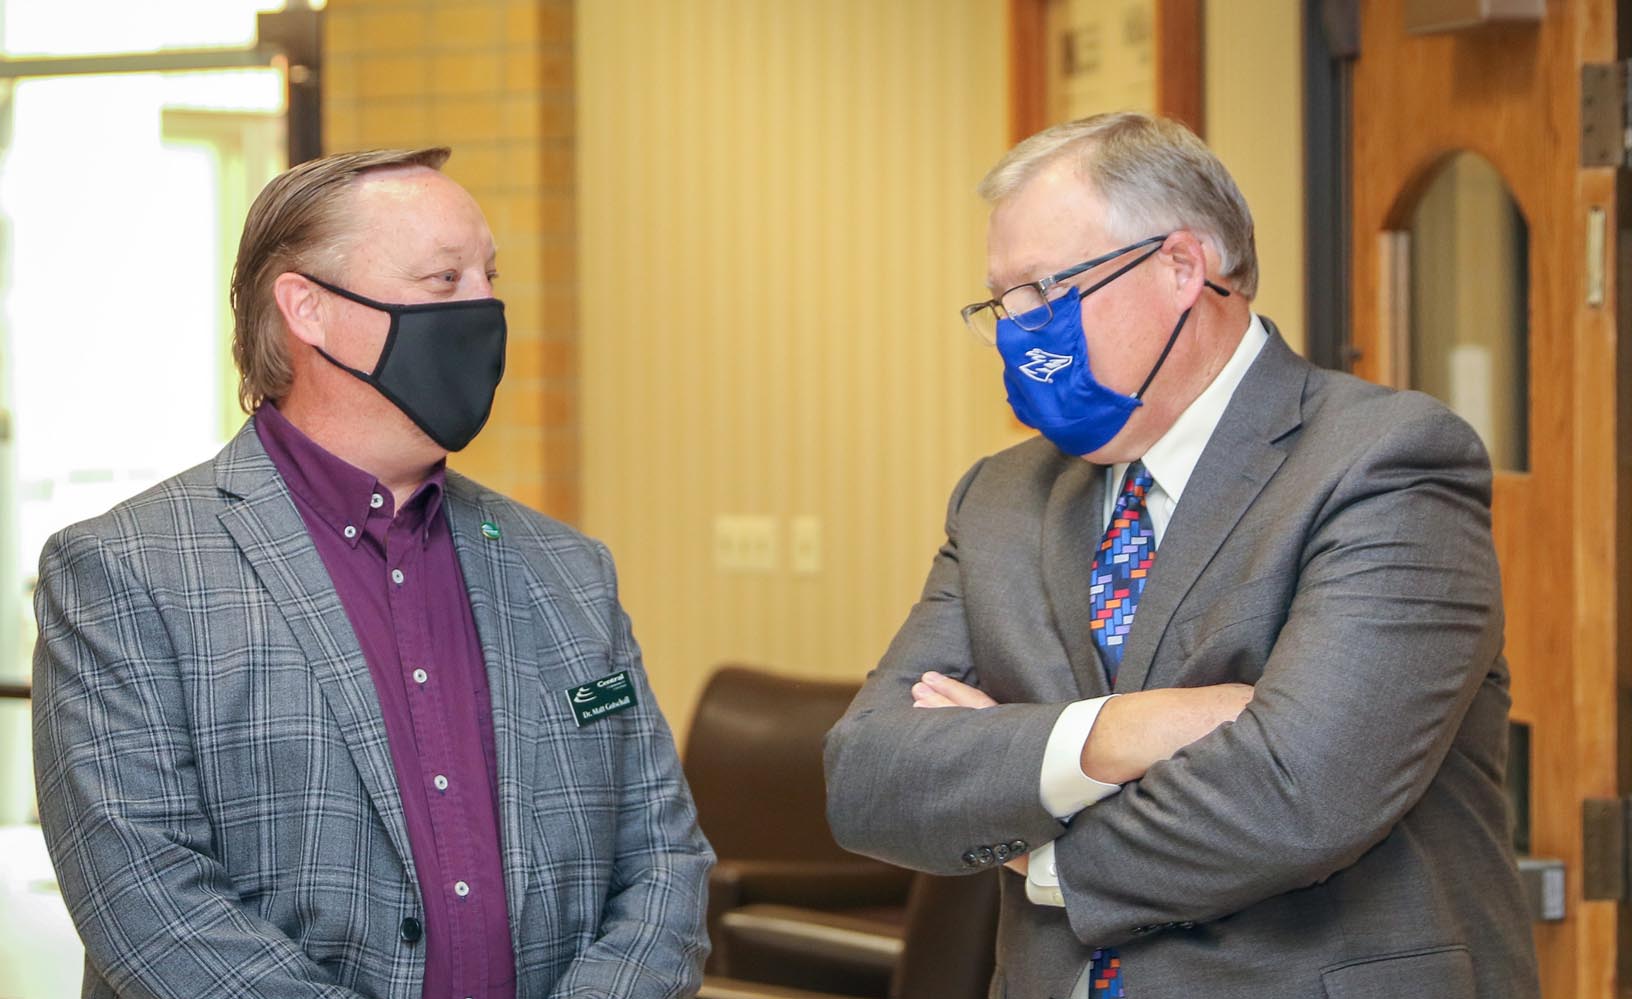 Central Community College President Matt Gotschall, left, and UNK Chancellor Doug Kristensen chat during Friday’s ribbon-cutting celebrating UNK’s new partnership with College Park at Grand Island.